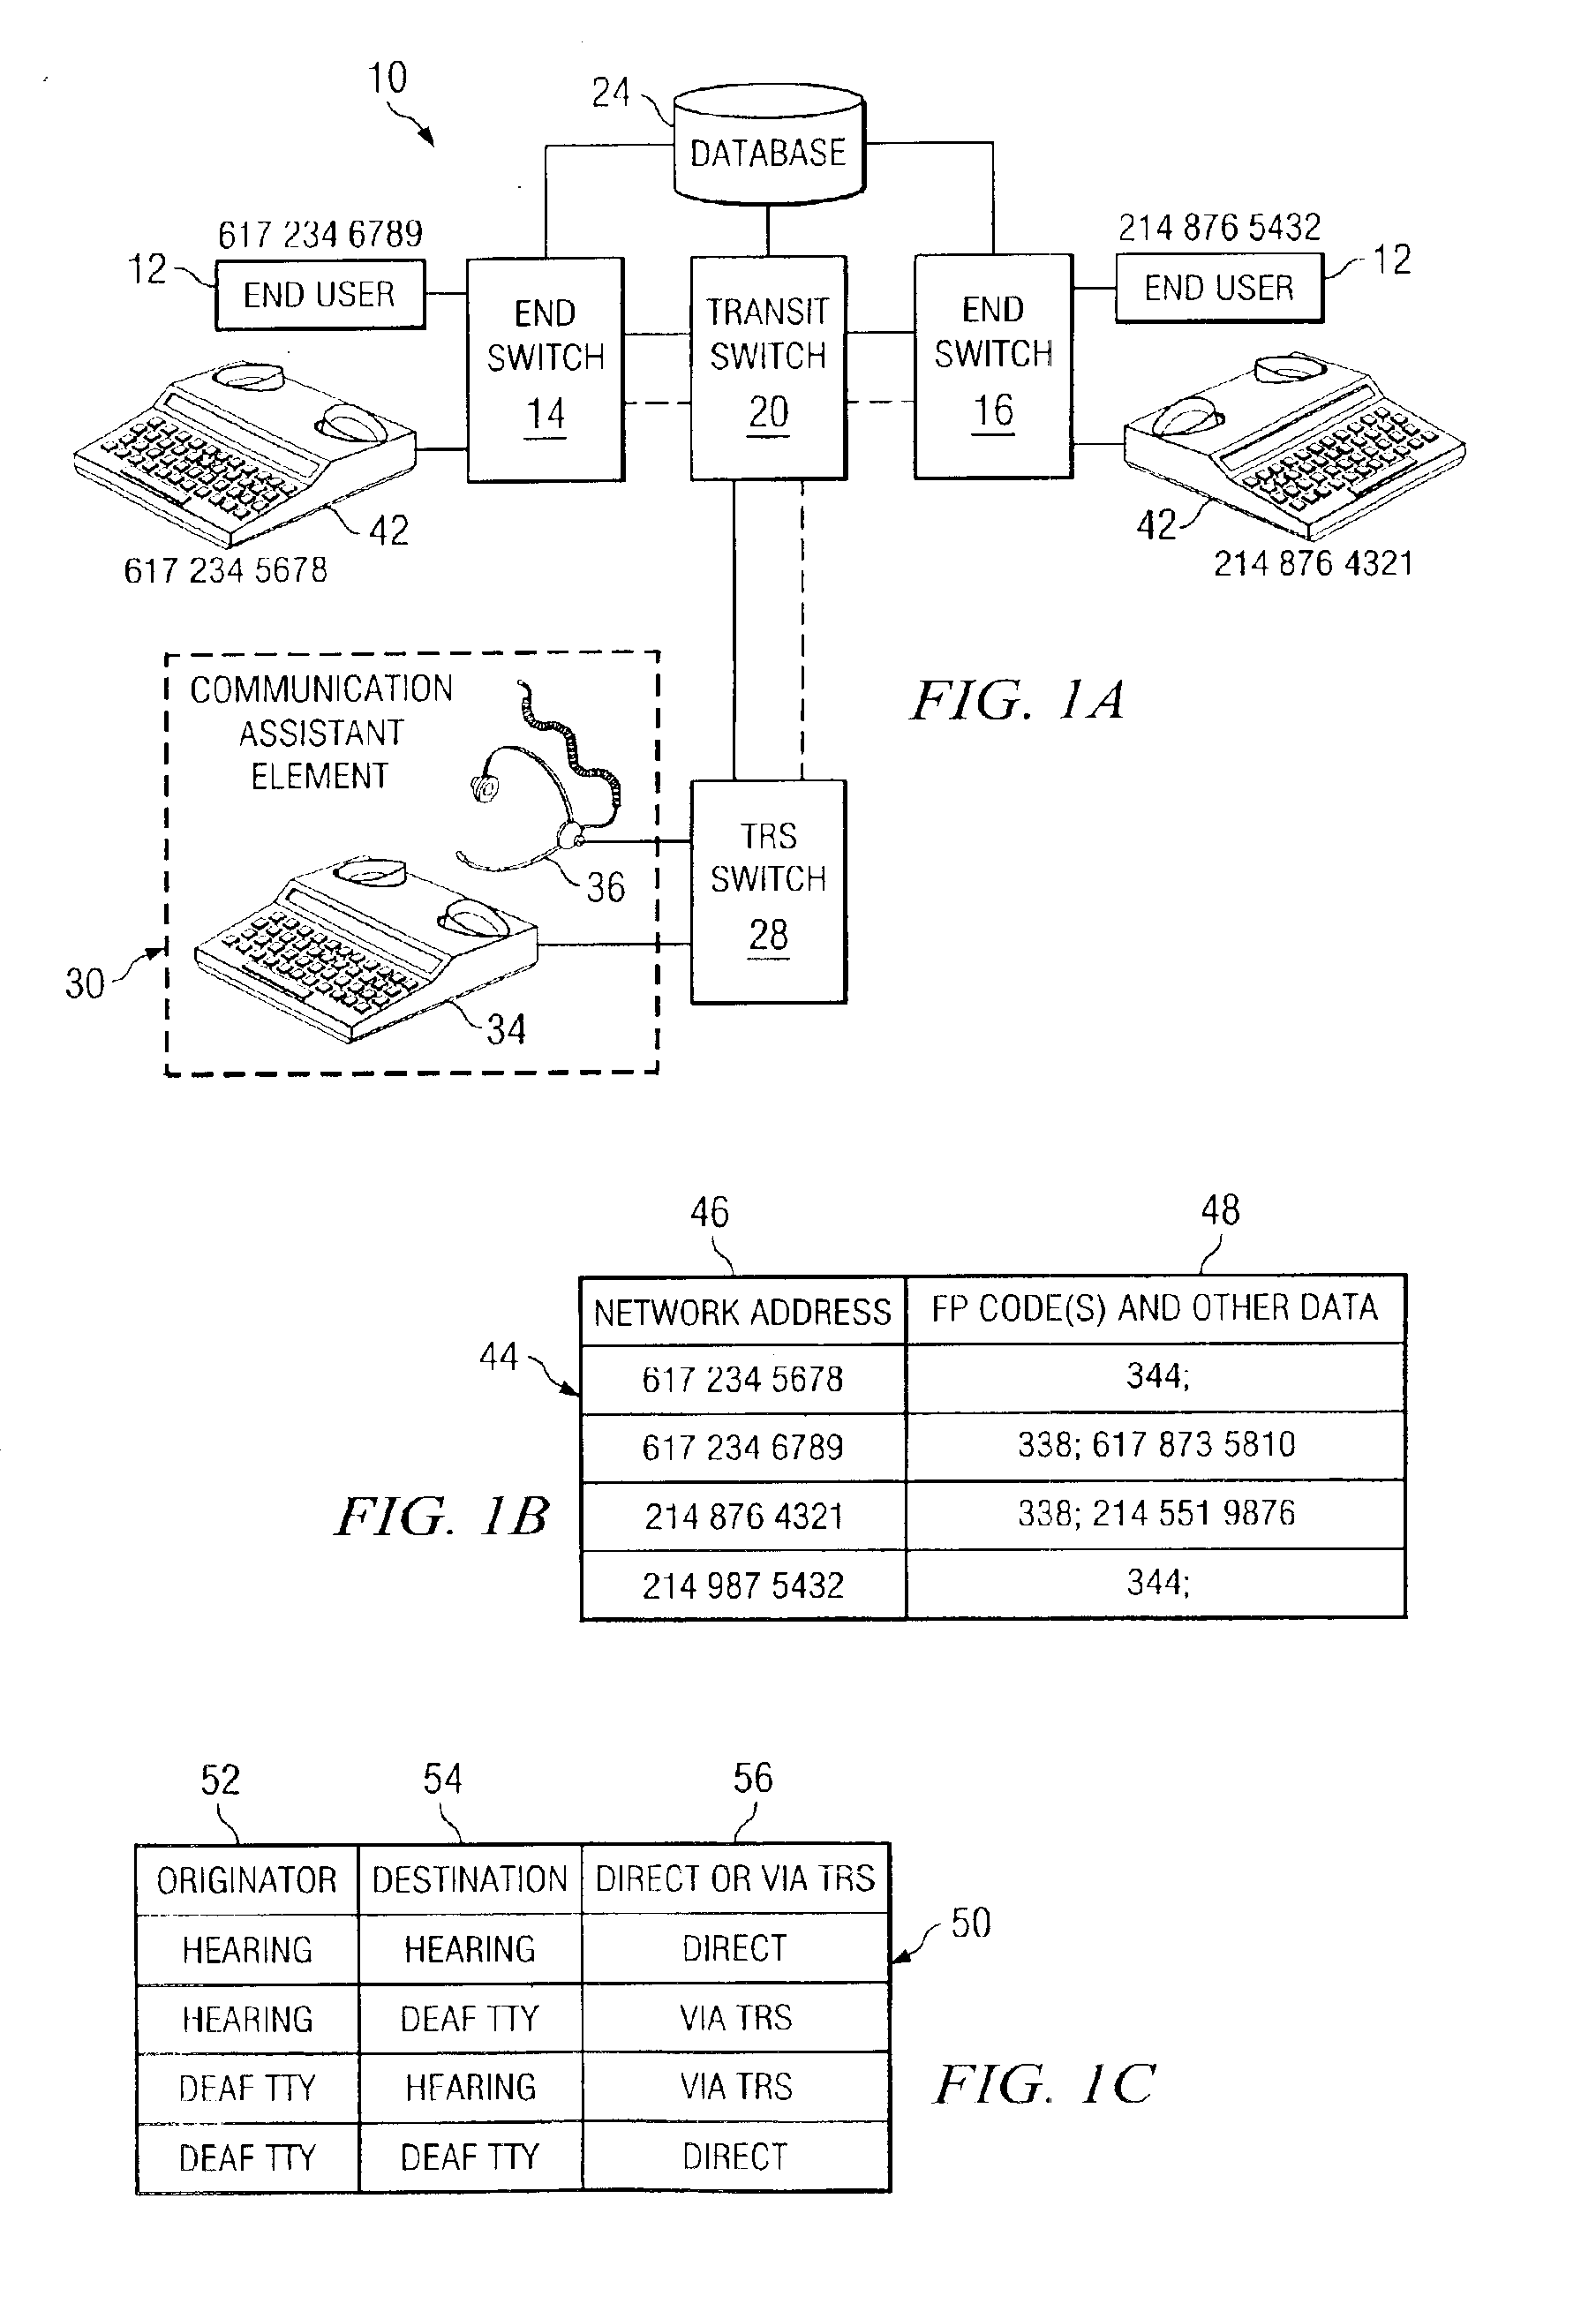 System and method for establishing automatic multipoint network connections in a communications environment